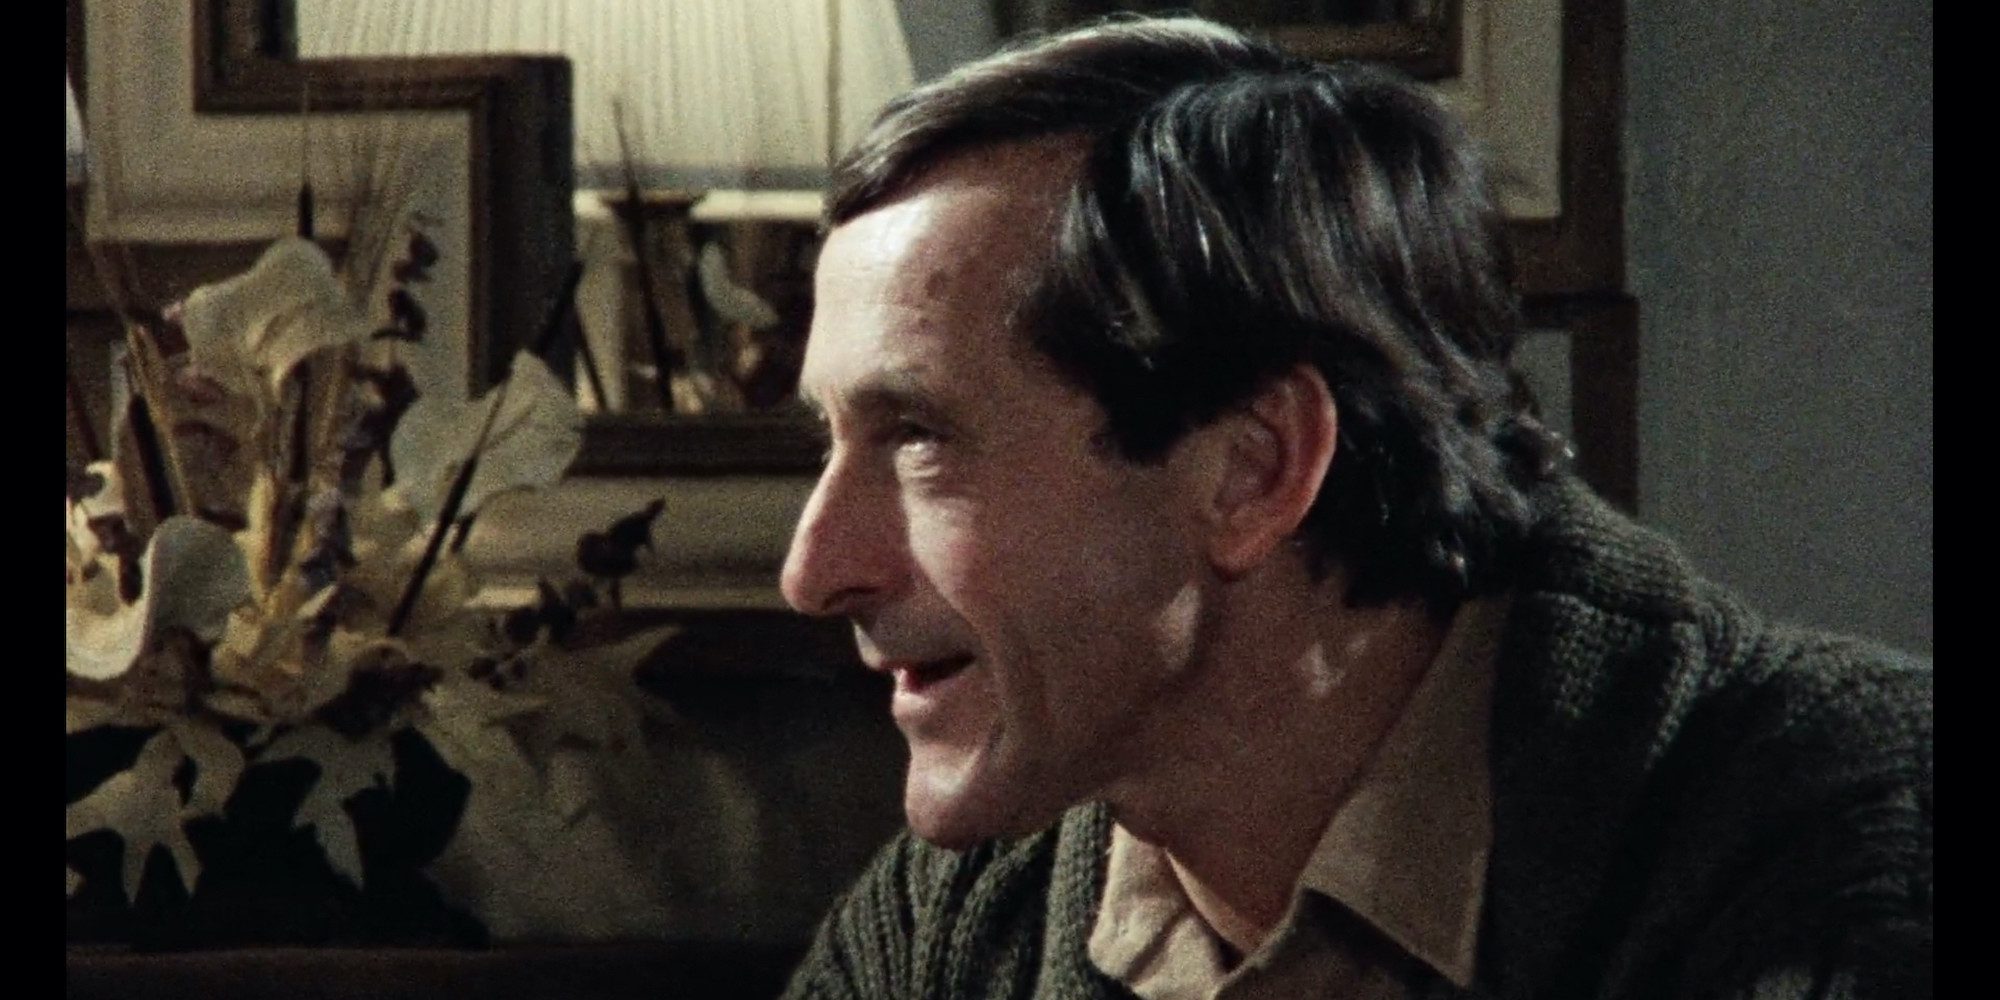 Louis Malle, My Dinner with André, 1981. André Gregory. edit